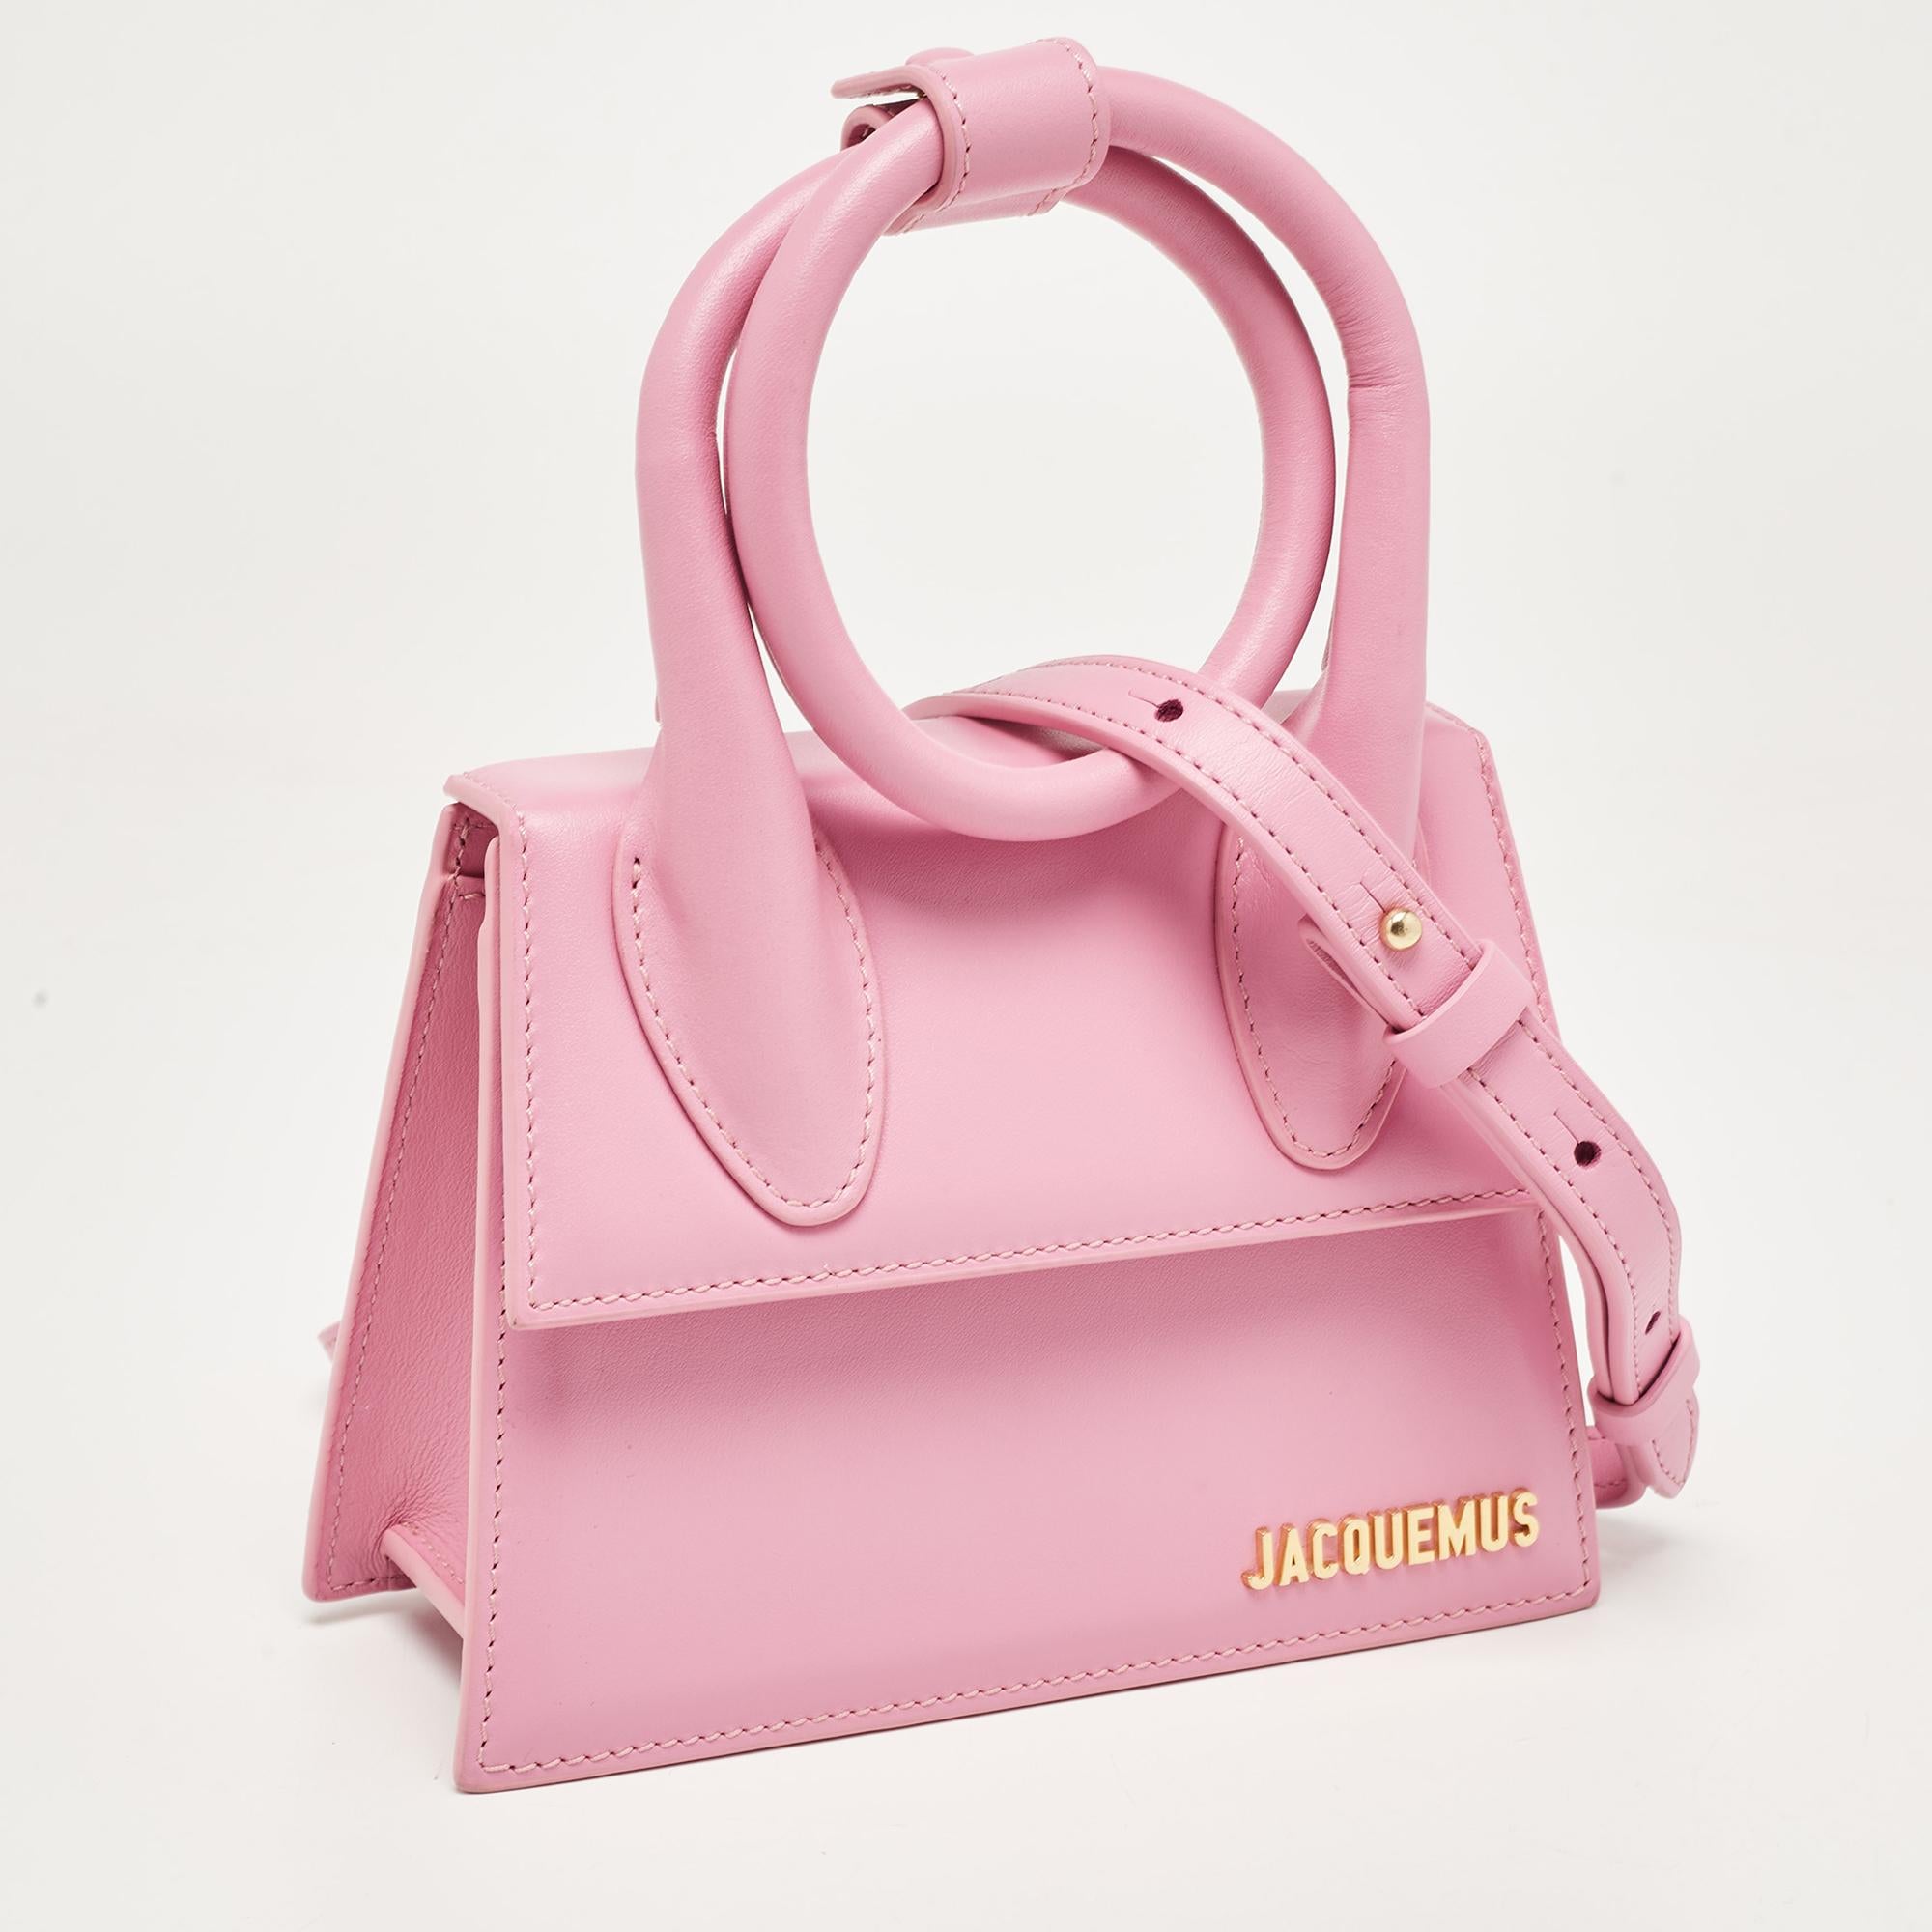 Women's Jacquemus Pink Leather Le Chiquito Noeud Top Handle Bag